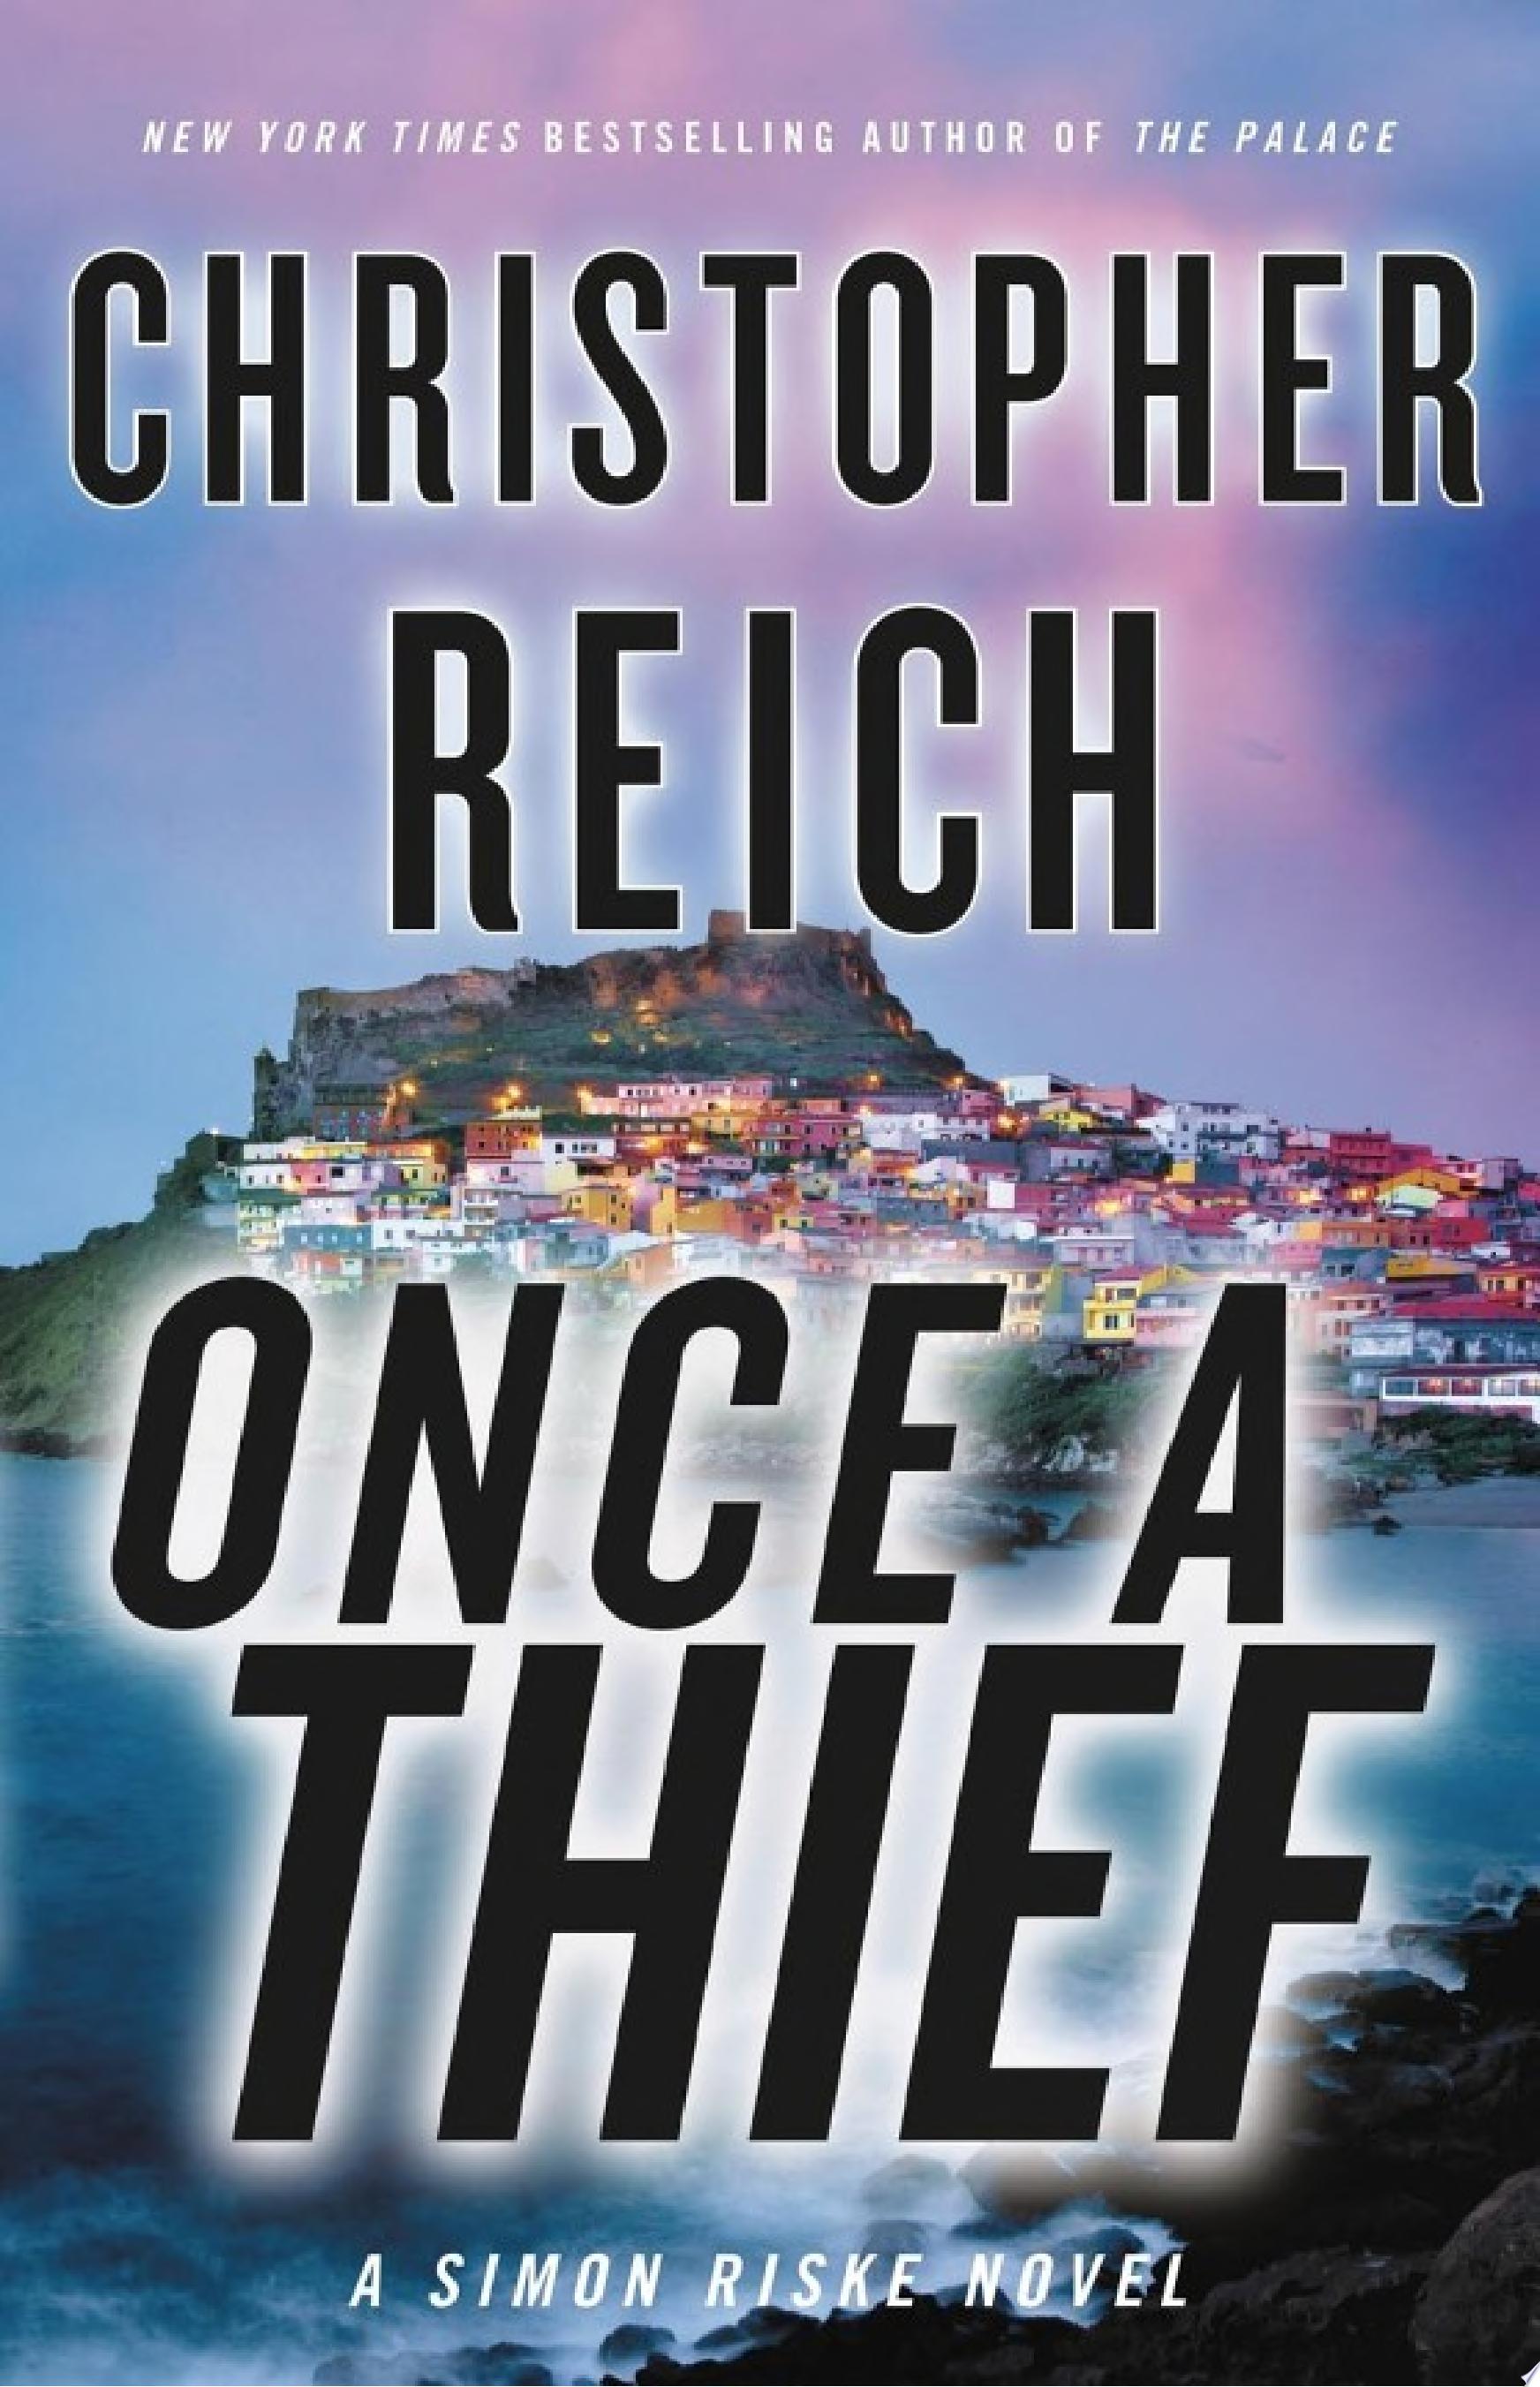 Image for "Once a Thief"